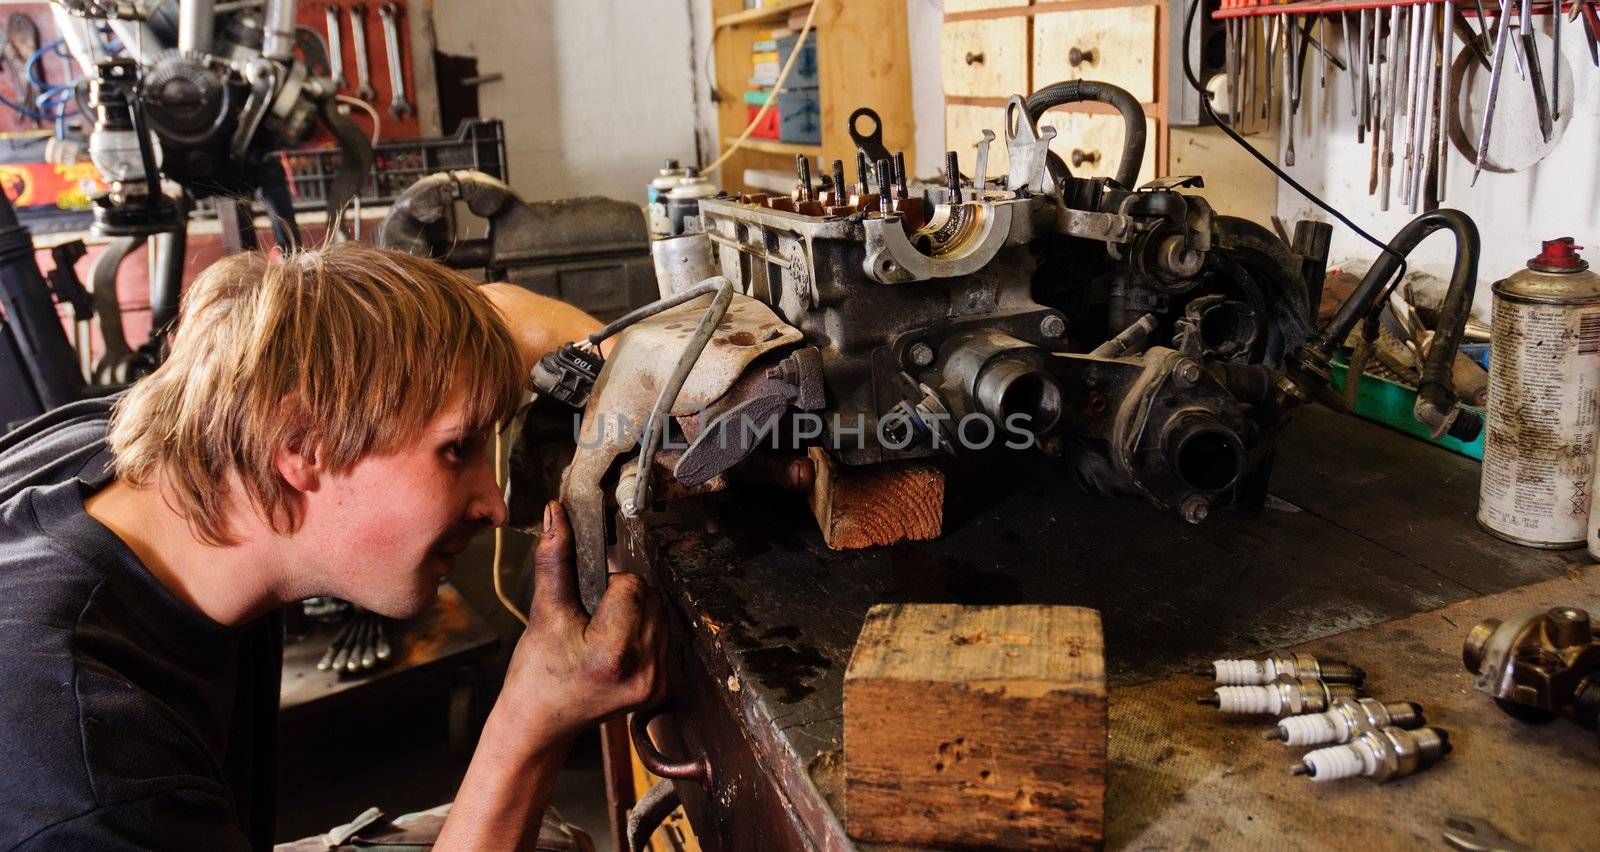 yOUNG MECHANIC by svedoliver